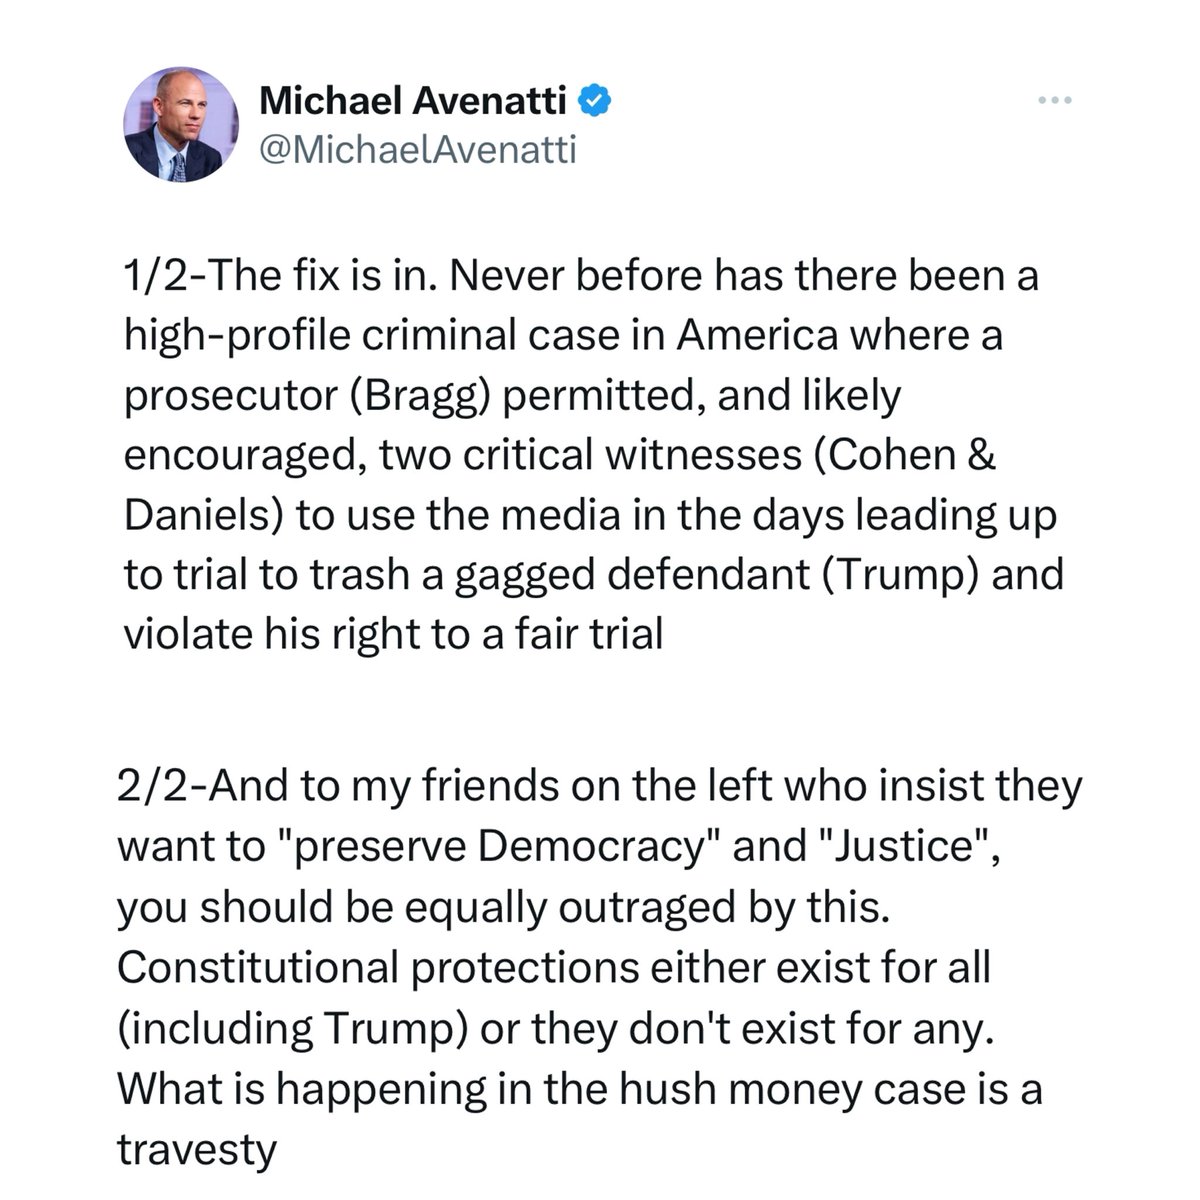 Wow @MichaelAvenatti continues to defend Trump against the Bragg witch hunt! Even Democrats know that this is a total HOAX!!!